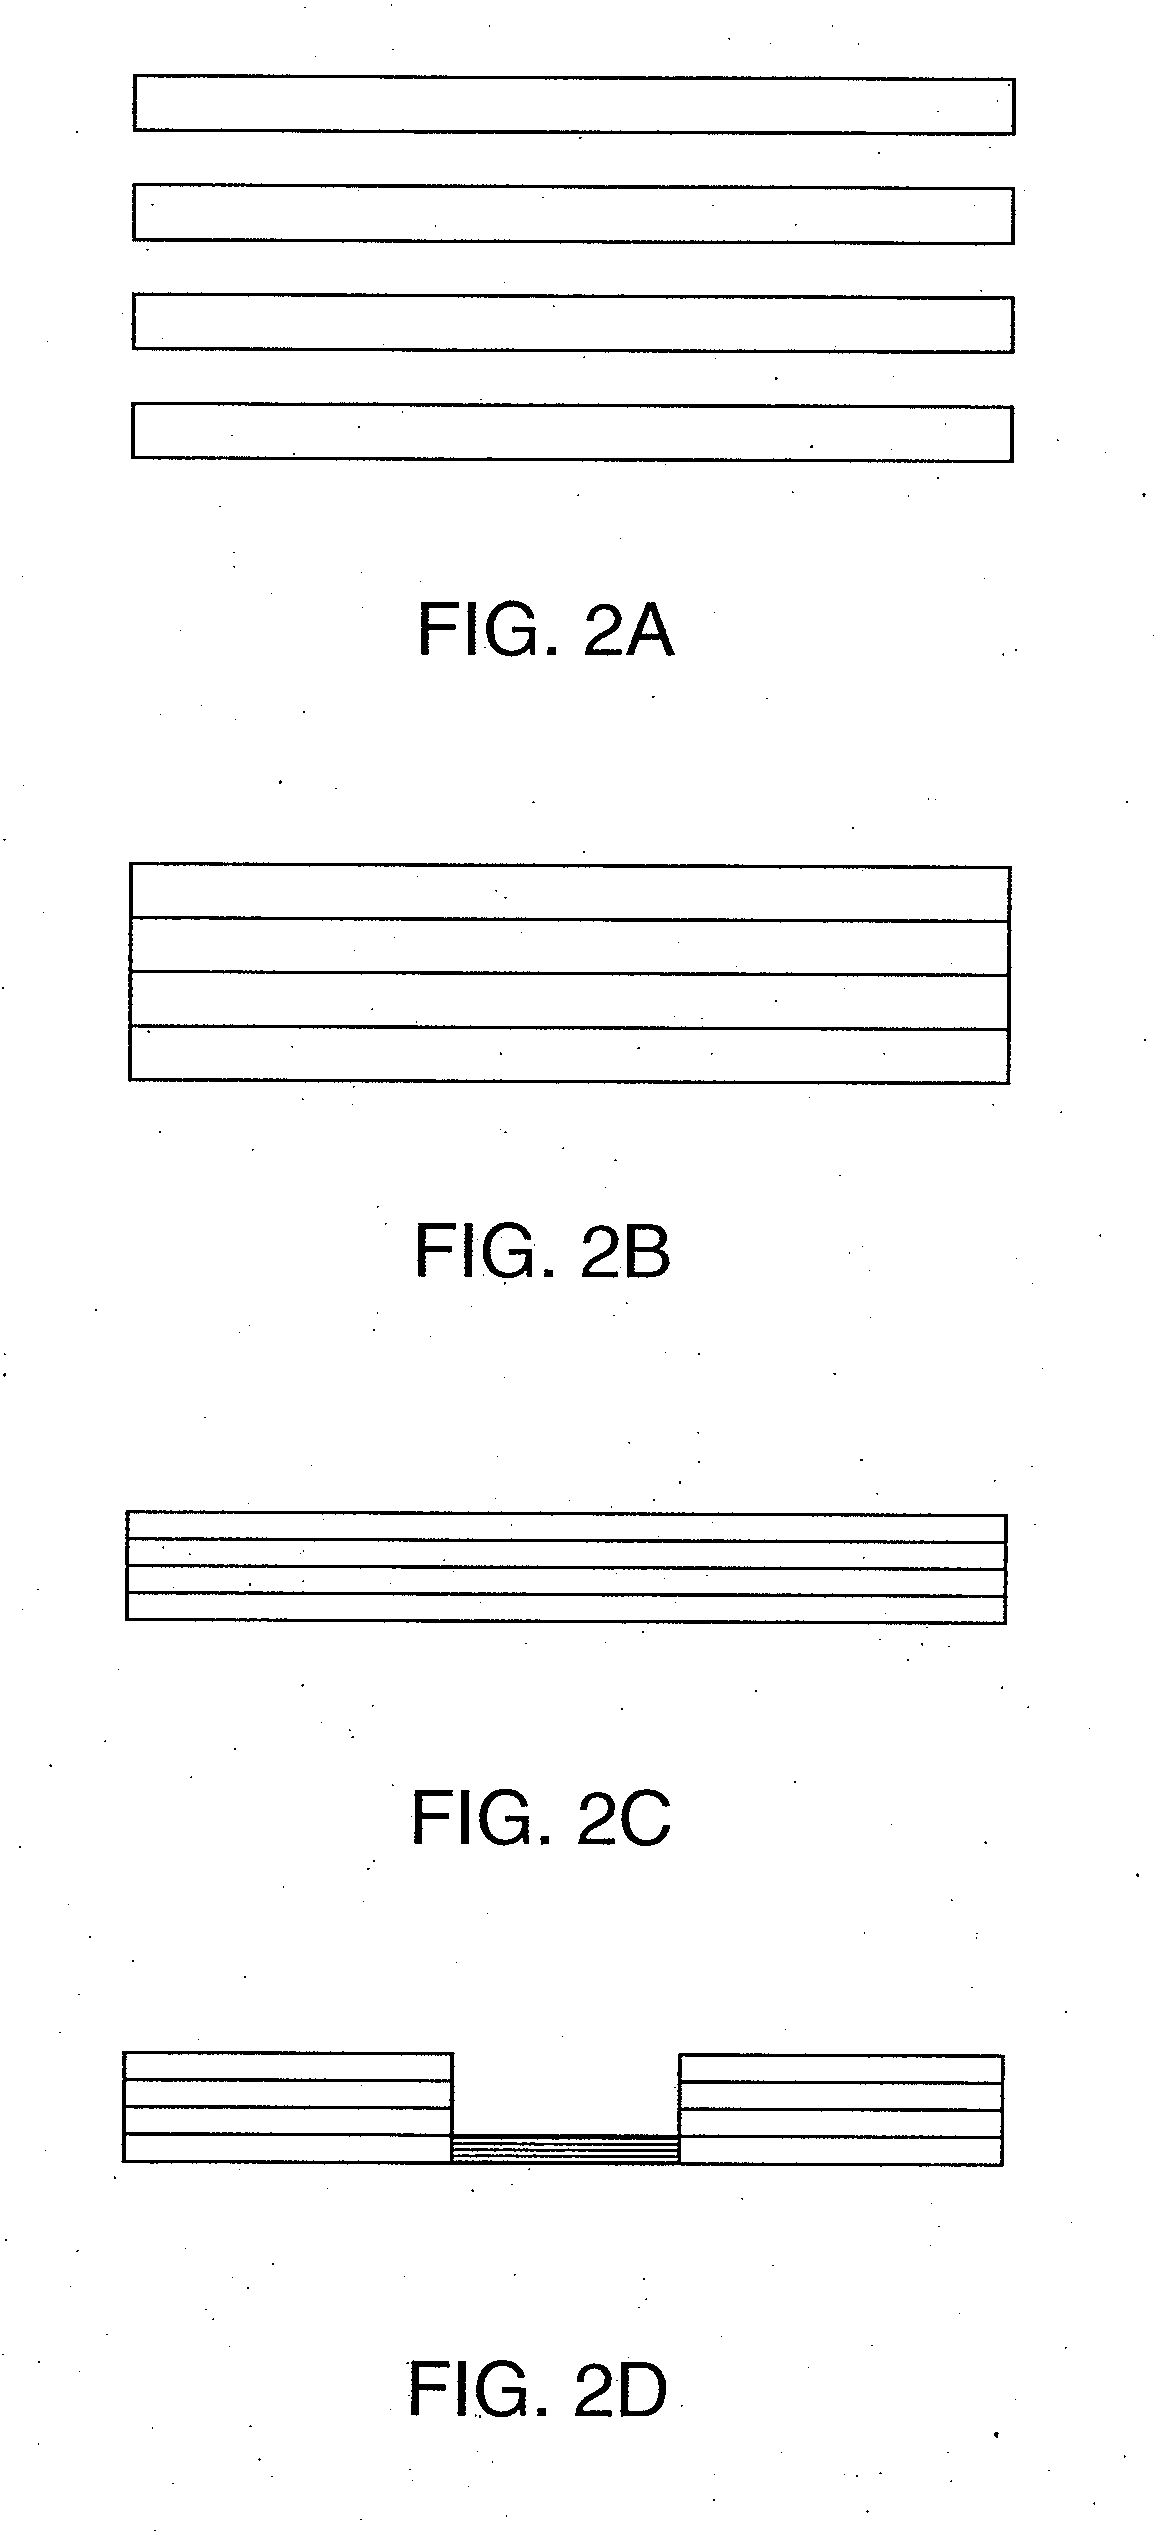 Apparatus and method for easing use of a spectrophotometric based noninvasive analyzer